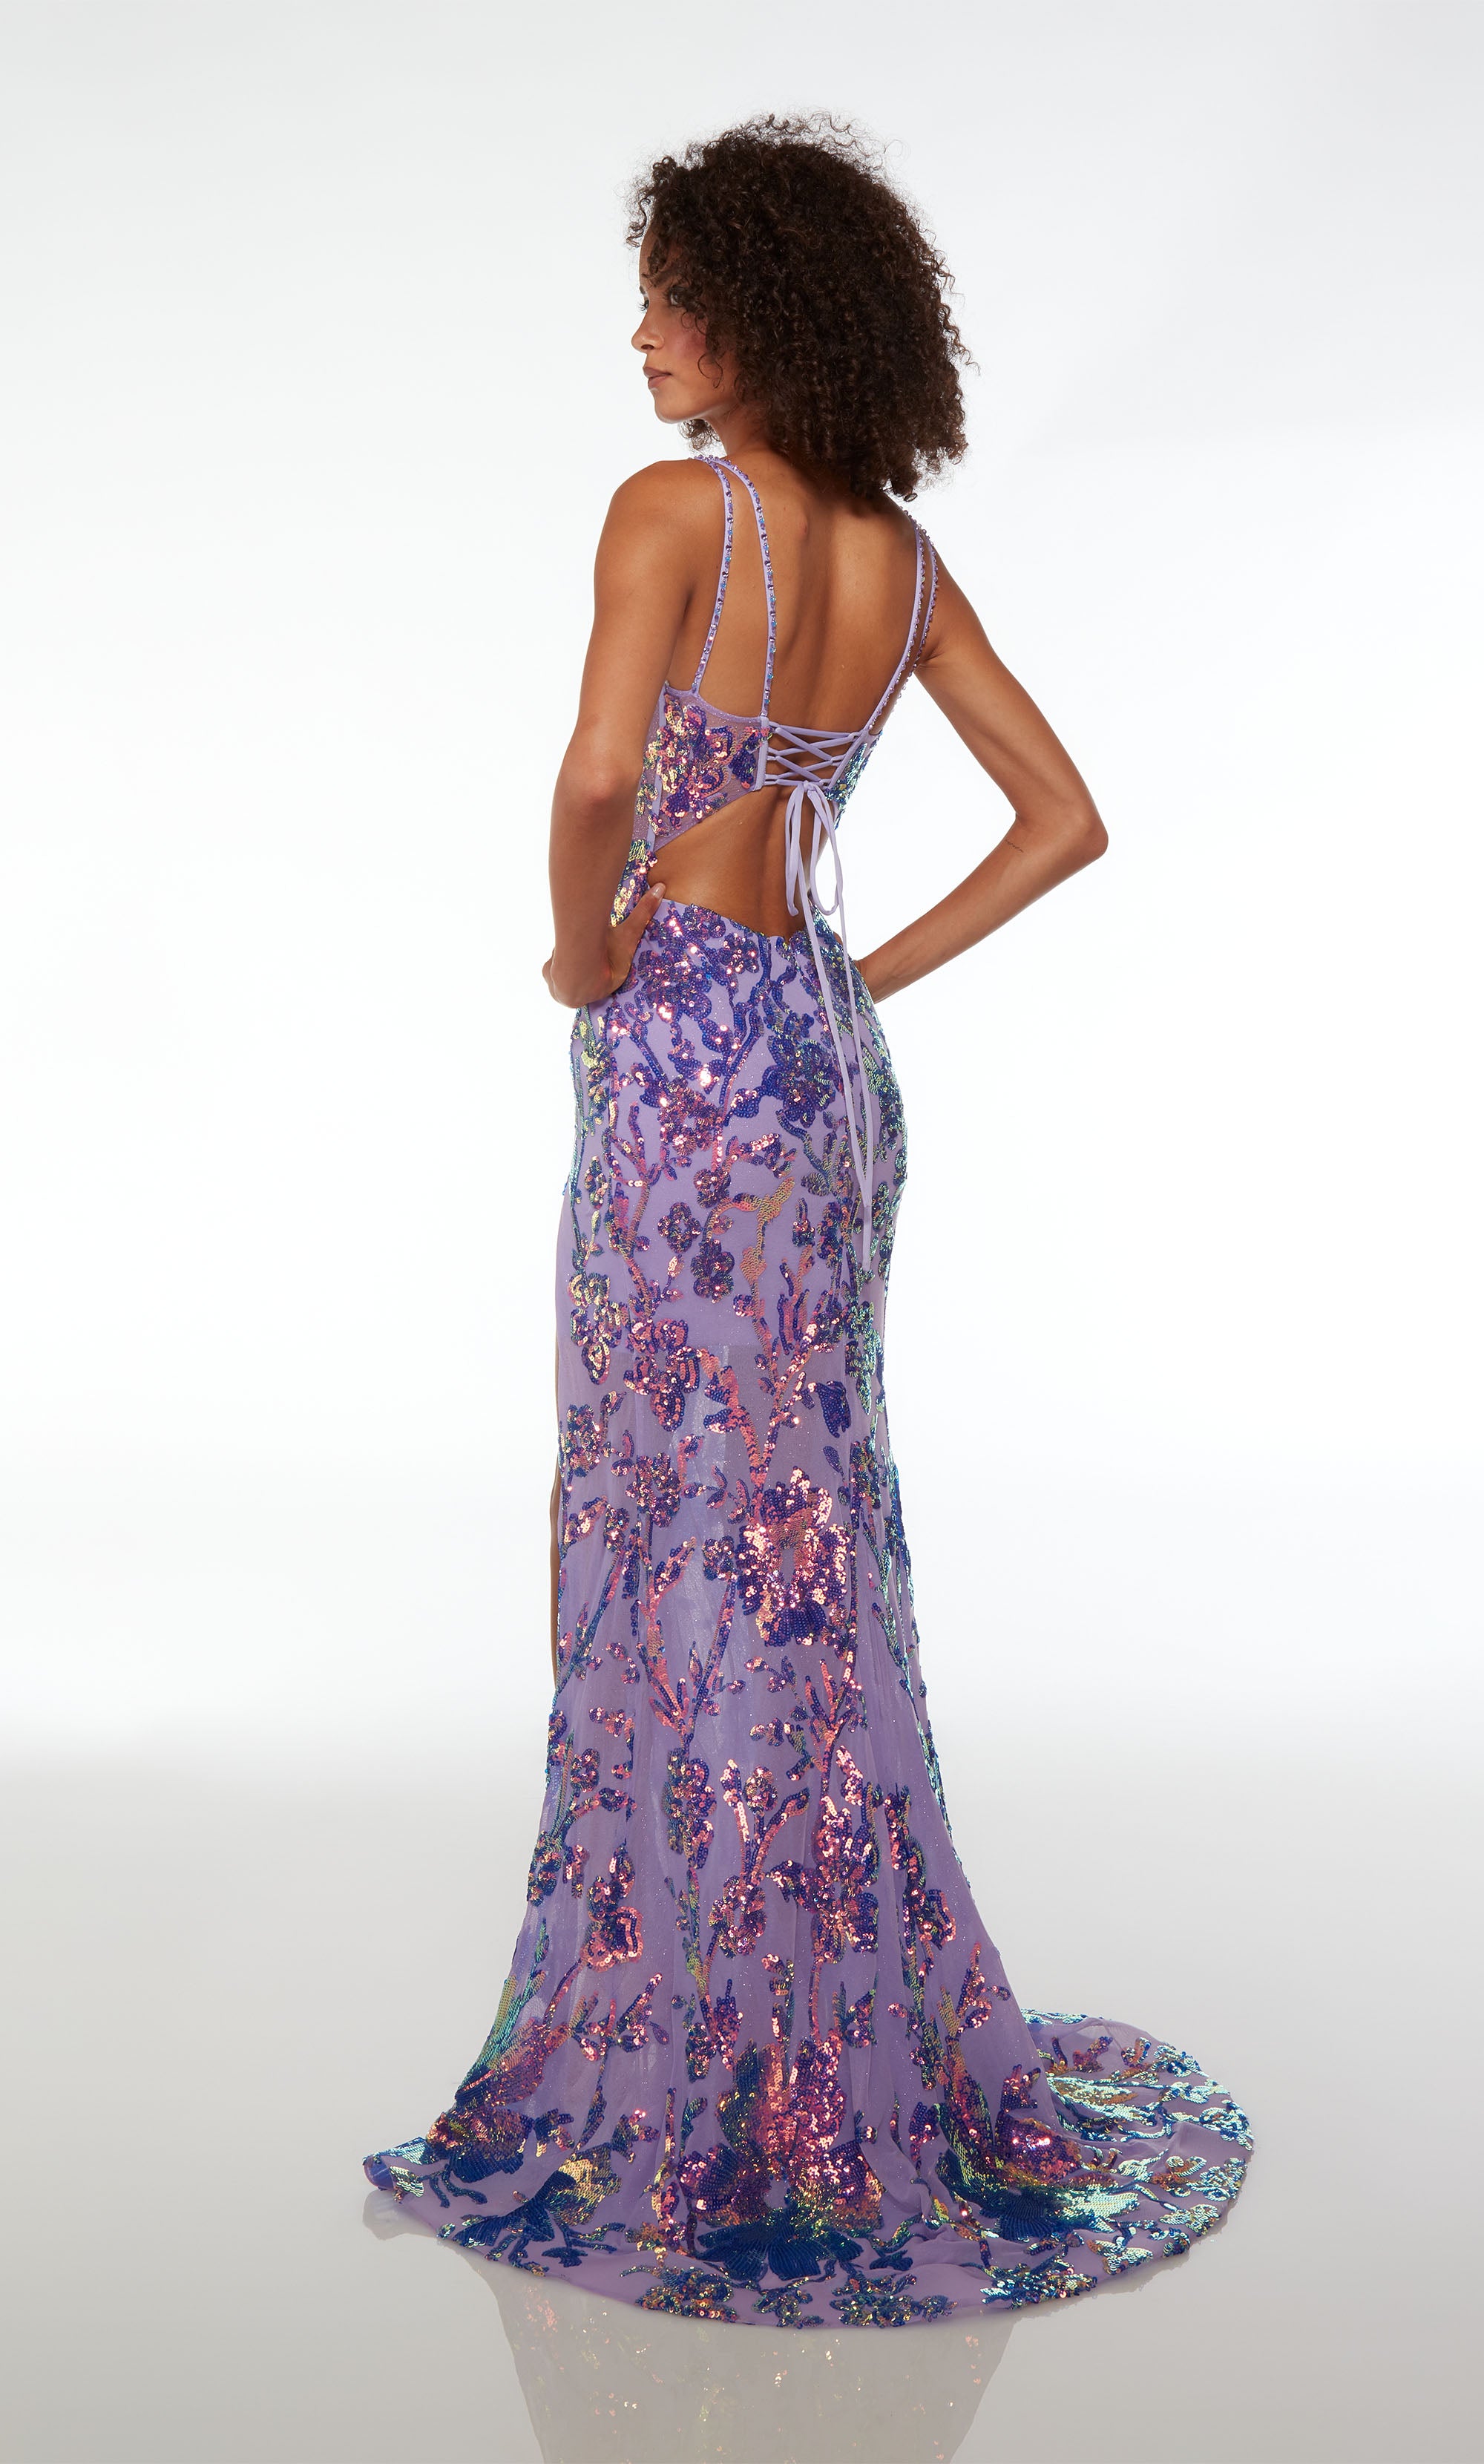 Purple prom dress with dual straps, sheer corset bodice, floral iridescent sequin detailing, side slit, lace-up back, and an graceful train.